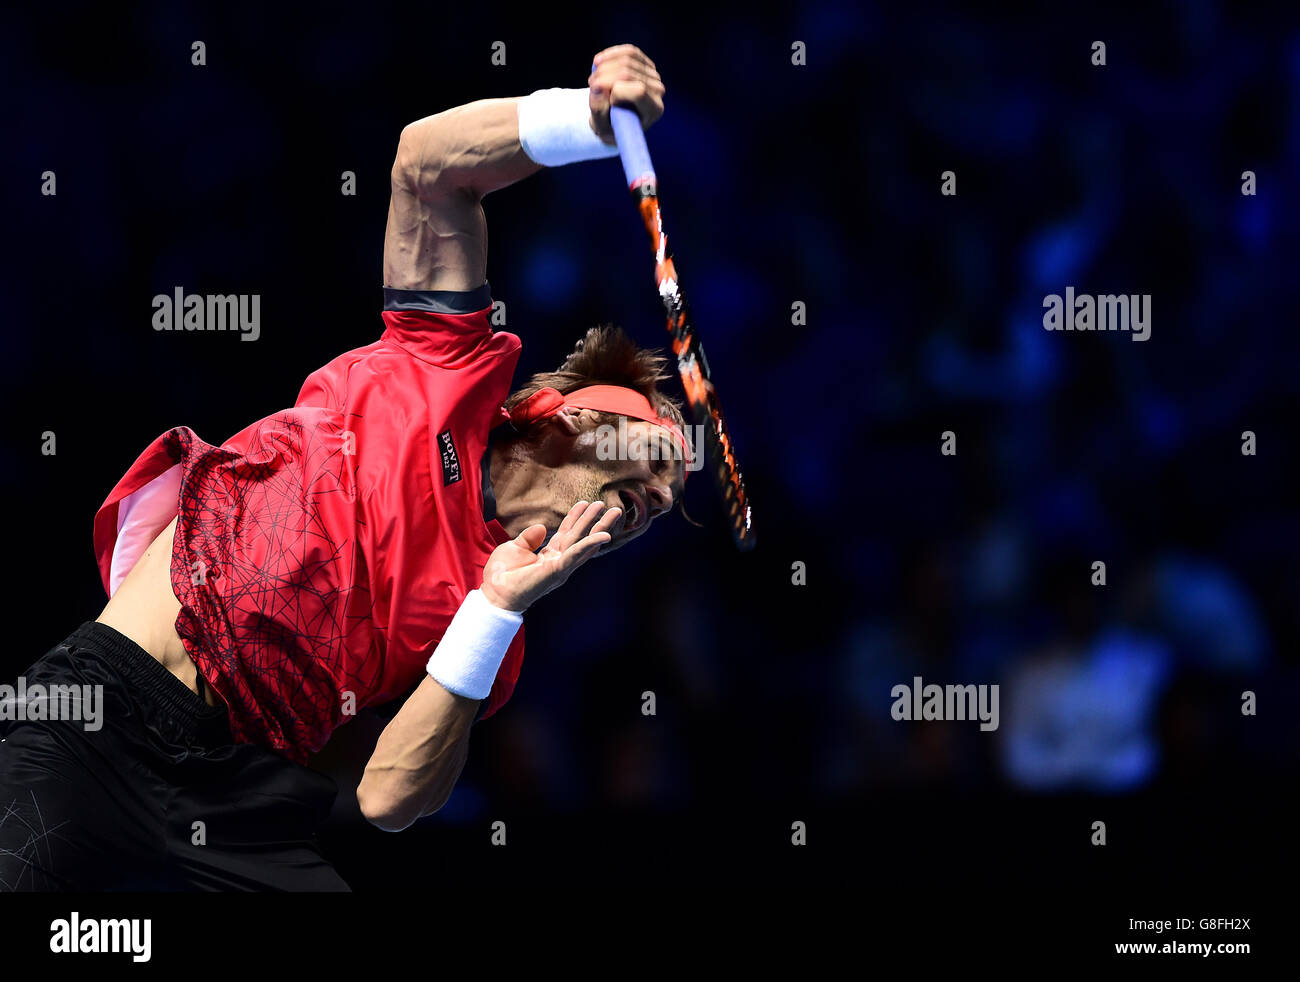 Spain's David Ferrer during day six of the ATP World Tour Finals at the O2 Arena, London. PRESS ASSSOCIATION Photo. Picture date: Friday November 20, 2015. See PA story TENNIS London. Photo credit should read: Adam Davy/PA Wire. Stock Photo